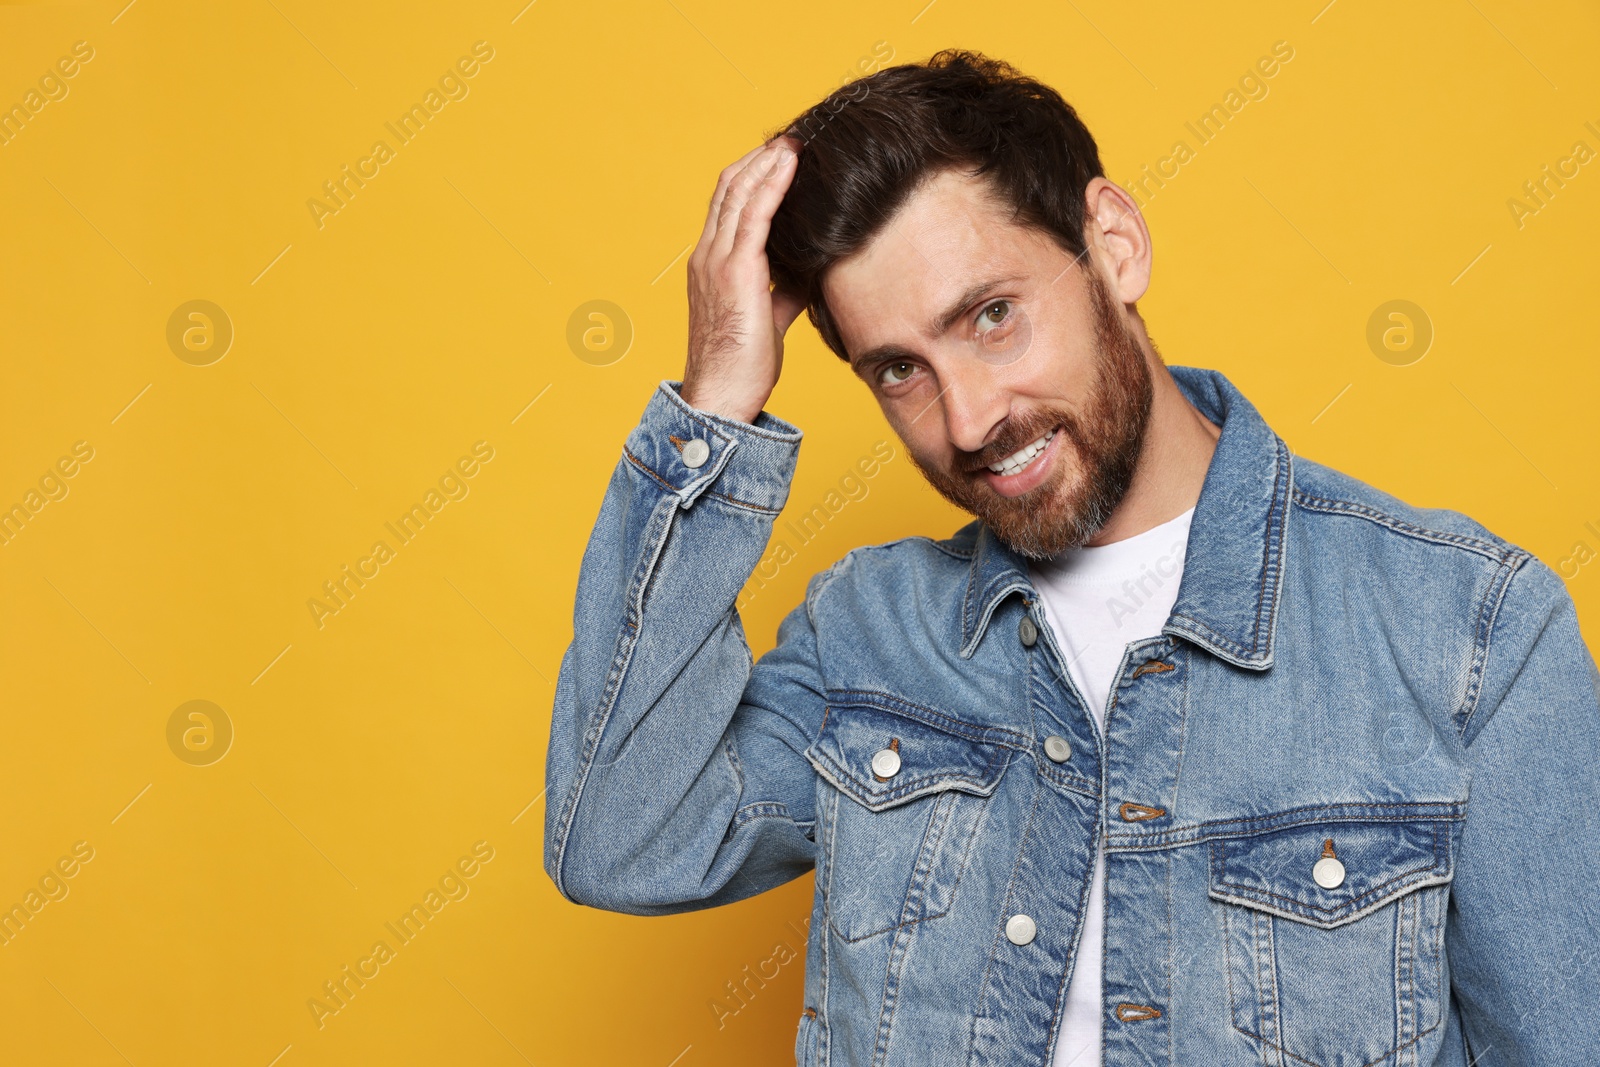 Photo of Bearded man fixing hair on orange background. Space for text